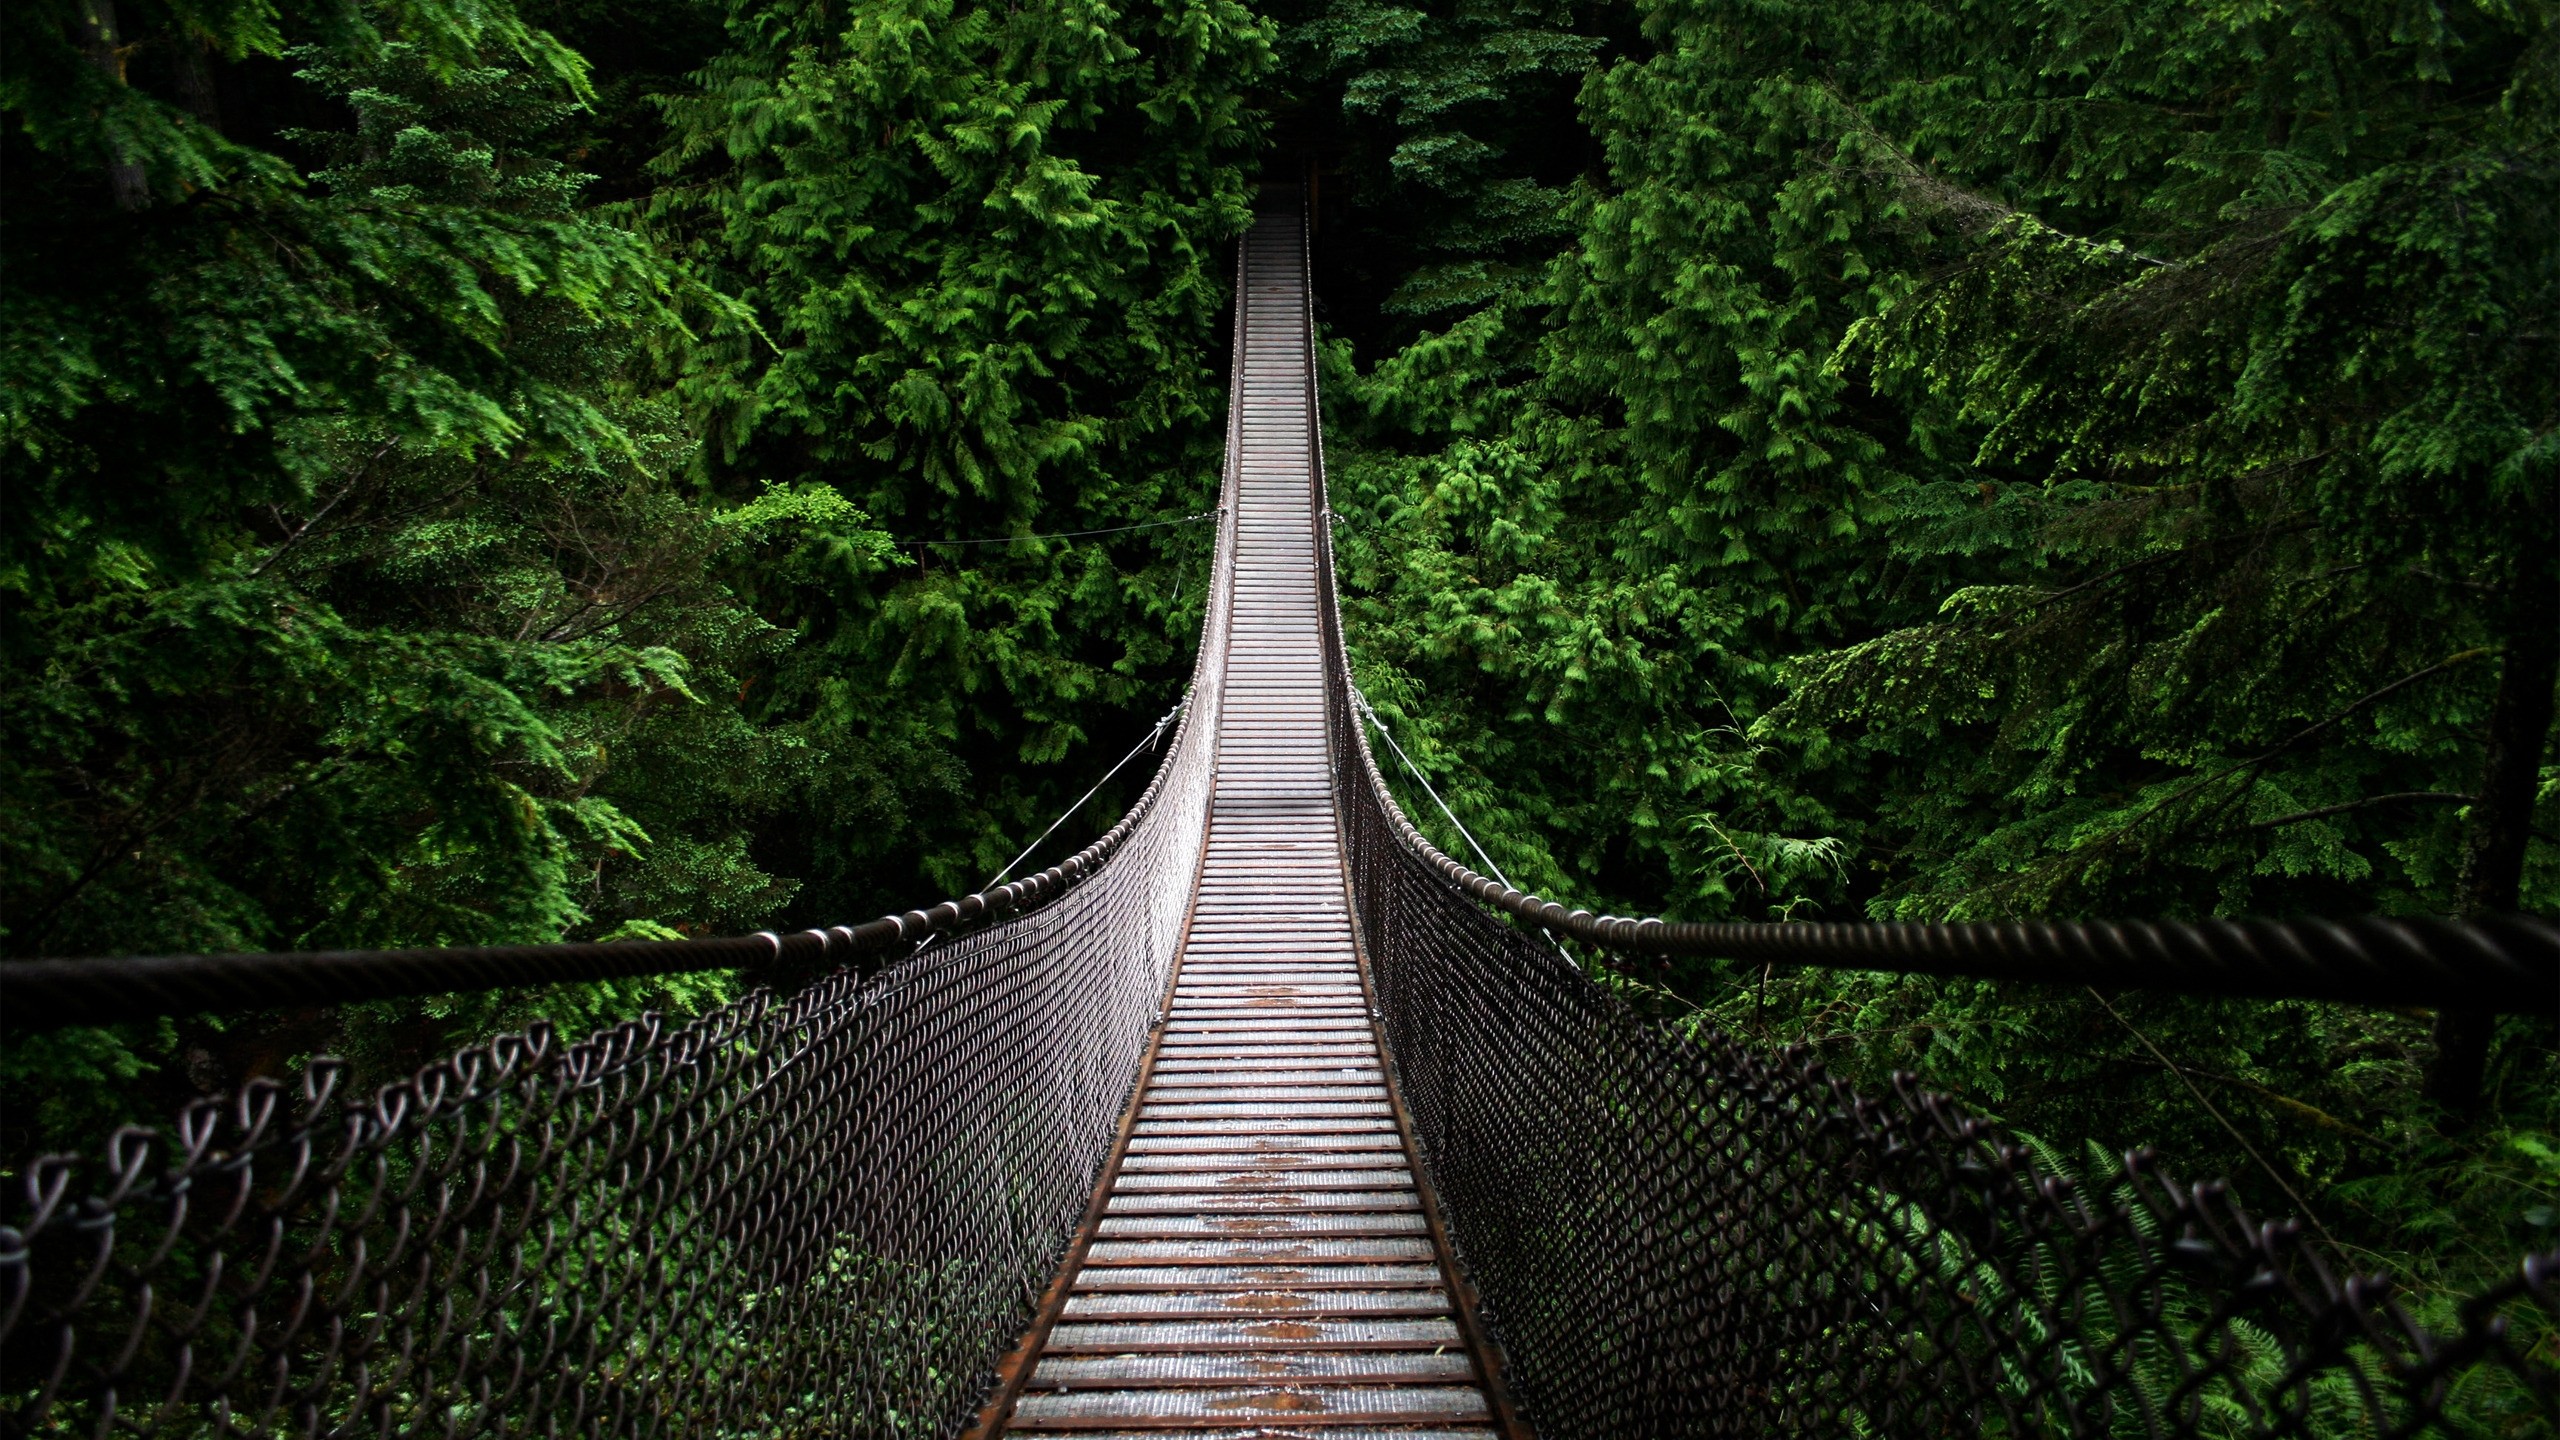 2560x1440 Bridge in the forest hd backgrounds for mobile and pc free images download.